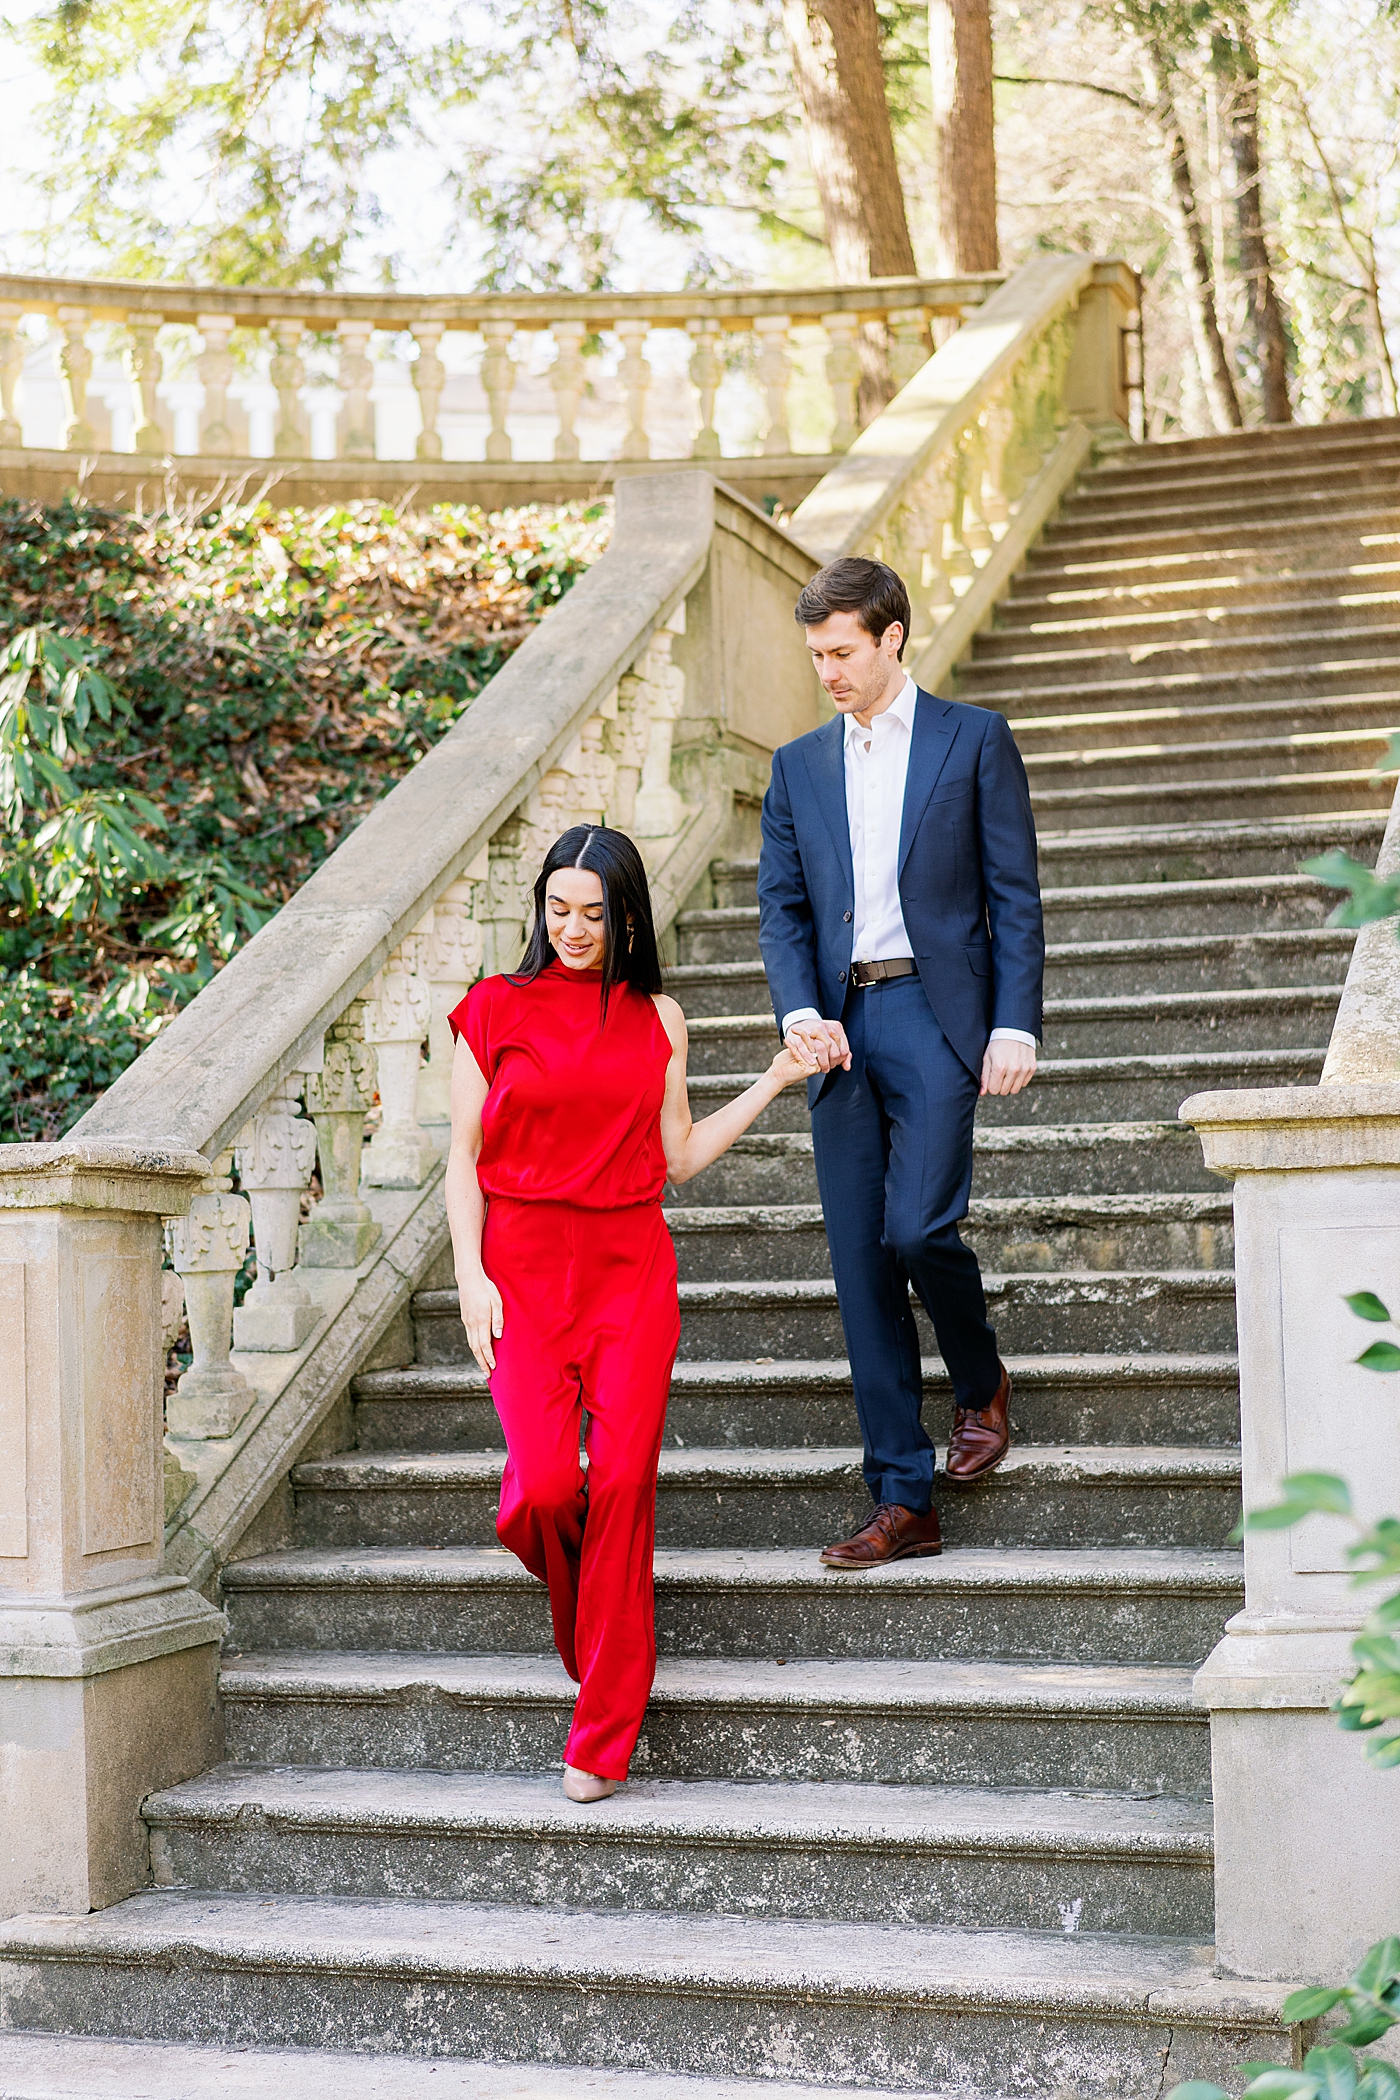 Couple in red and blue walking down stone staircase | Image by Annie Laura Photo